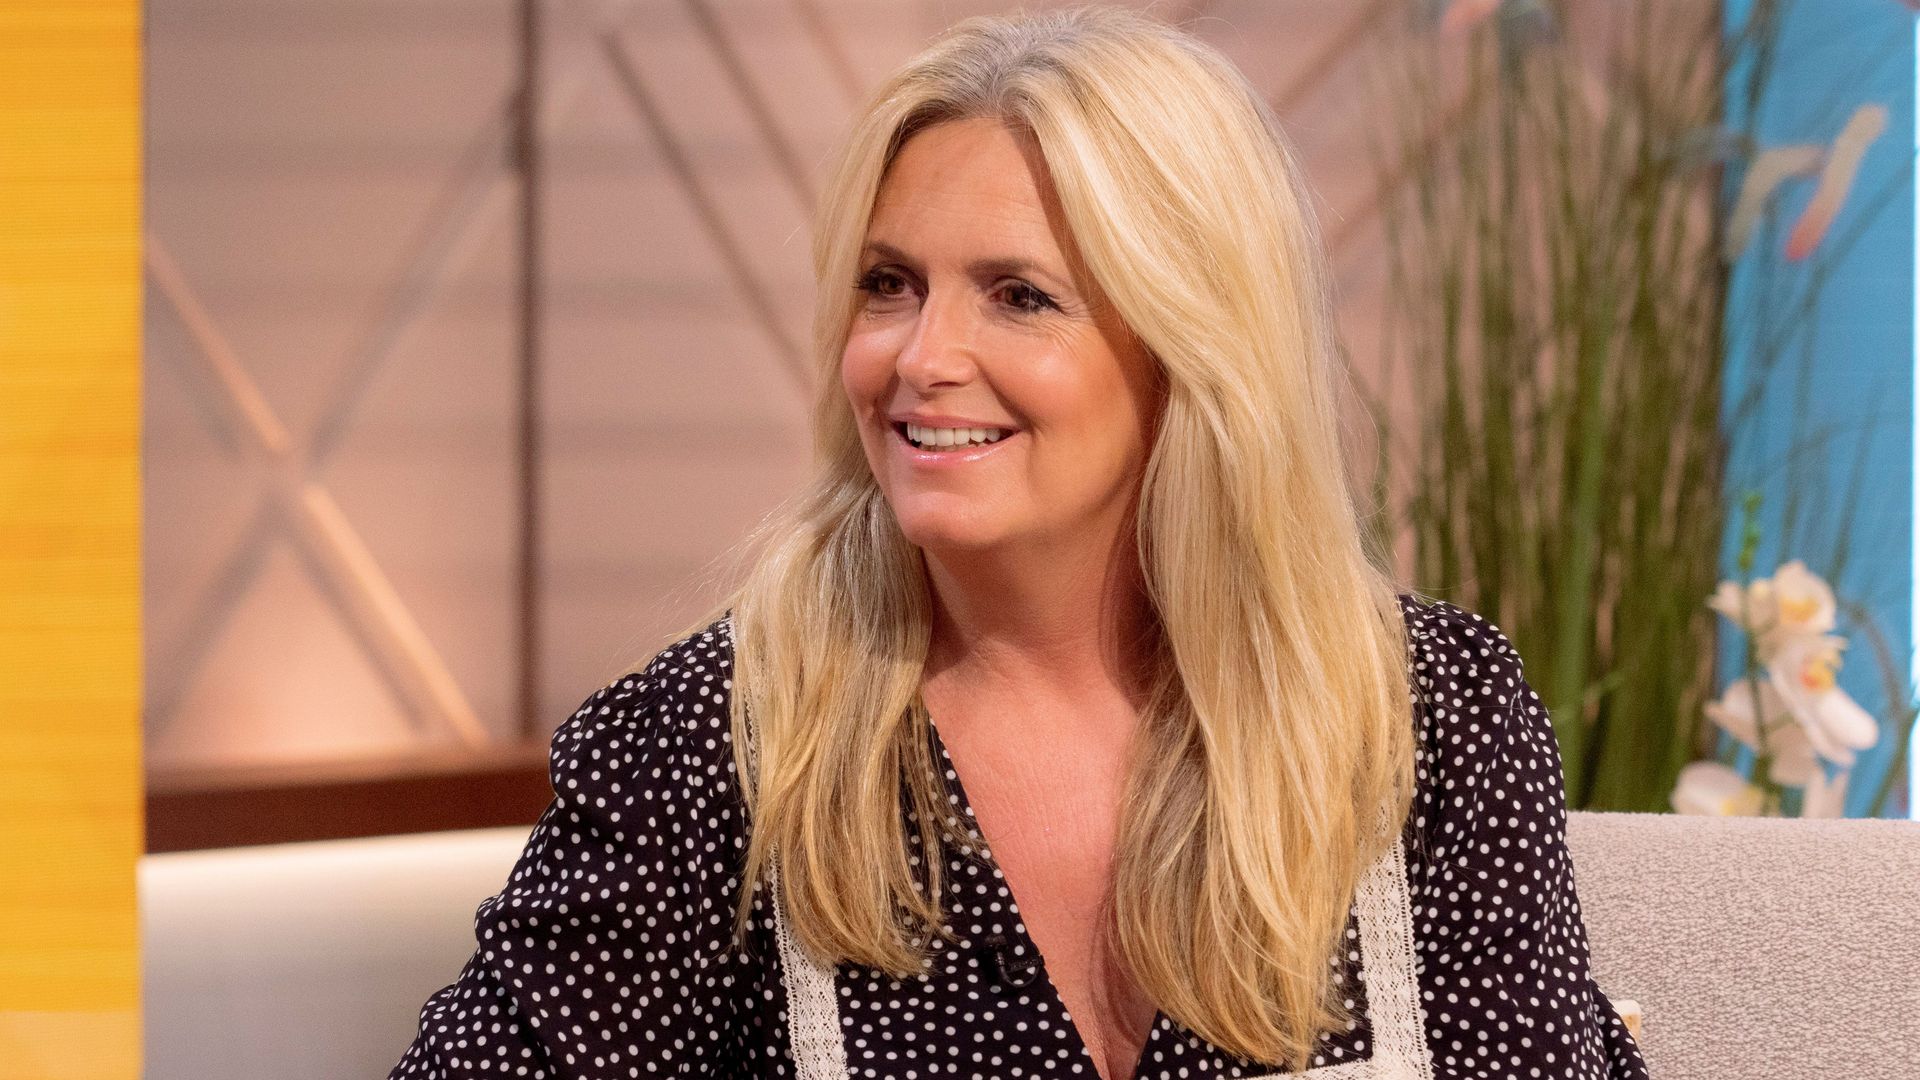 Penny Lancaster smiling in a polka dot top at the Menopause Mandate